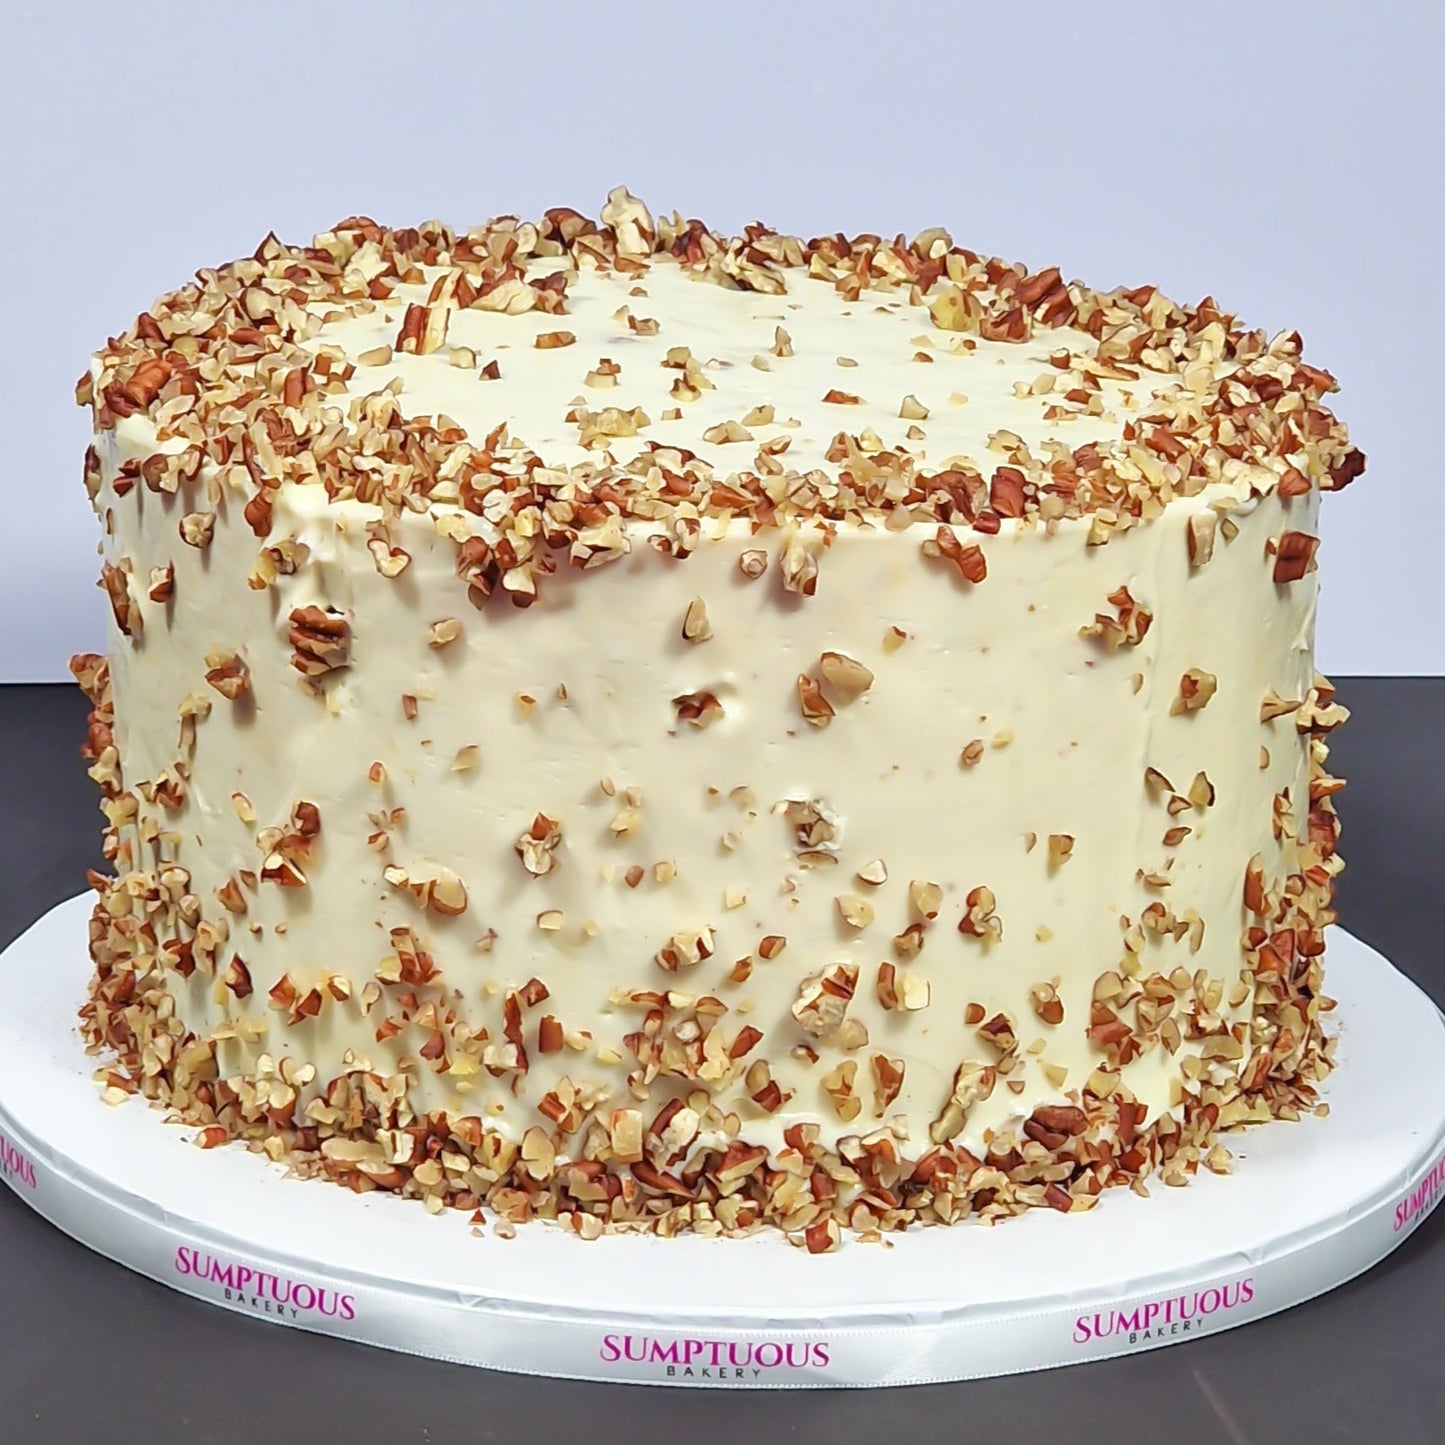 *COLLECTION ONLY* AWARD WINNING Sumptuous®️ Orange and Pecan Nut Carrot Cake